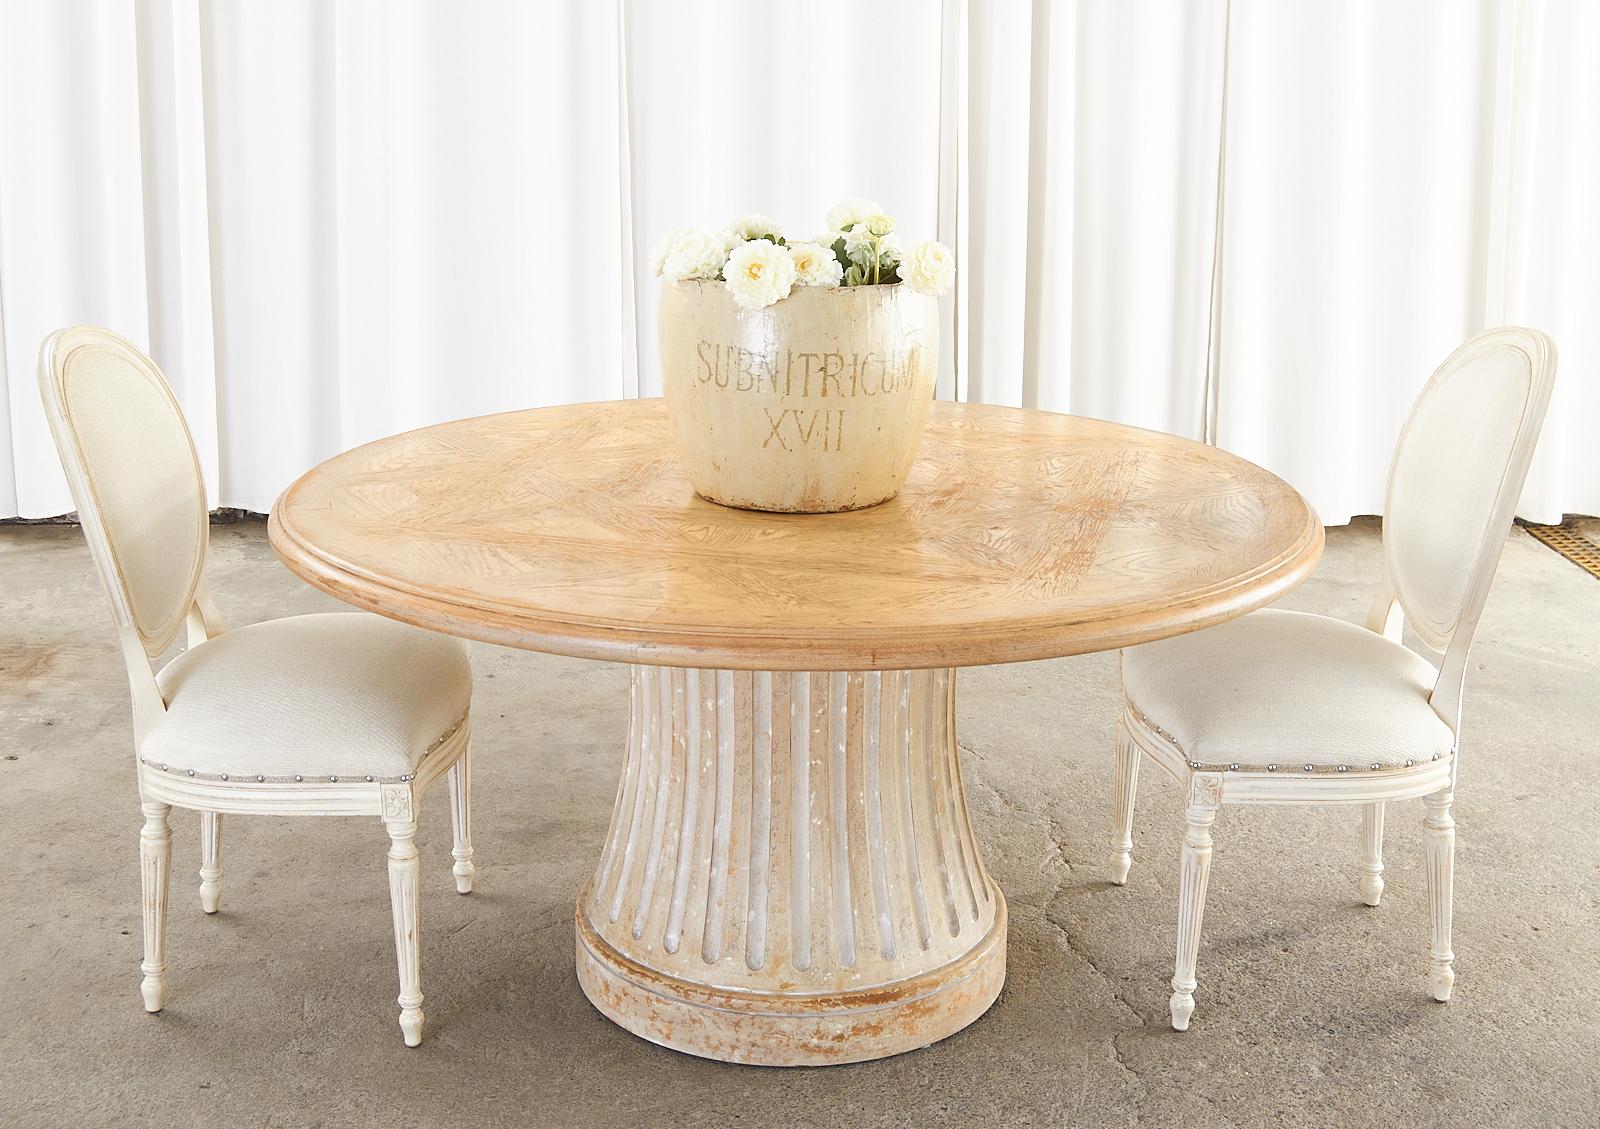 Distinctive round pedestal dining table featuring a round blonde oak top with parquetry inlay made in the country French style. The top is supported by a neoclassical style fluted column base with a distressed cerused finish on the waisted form. The